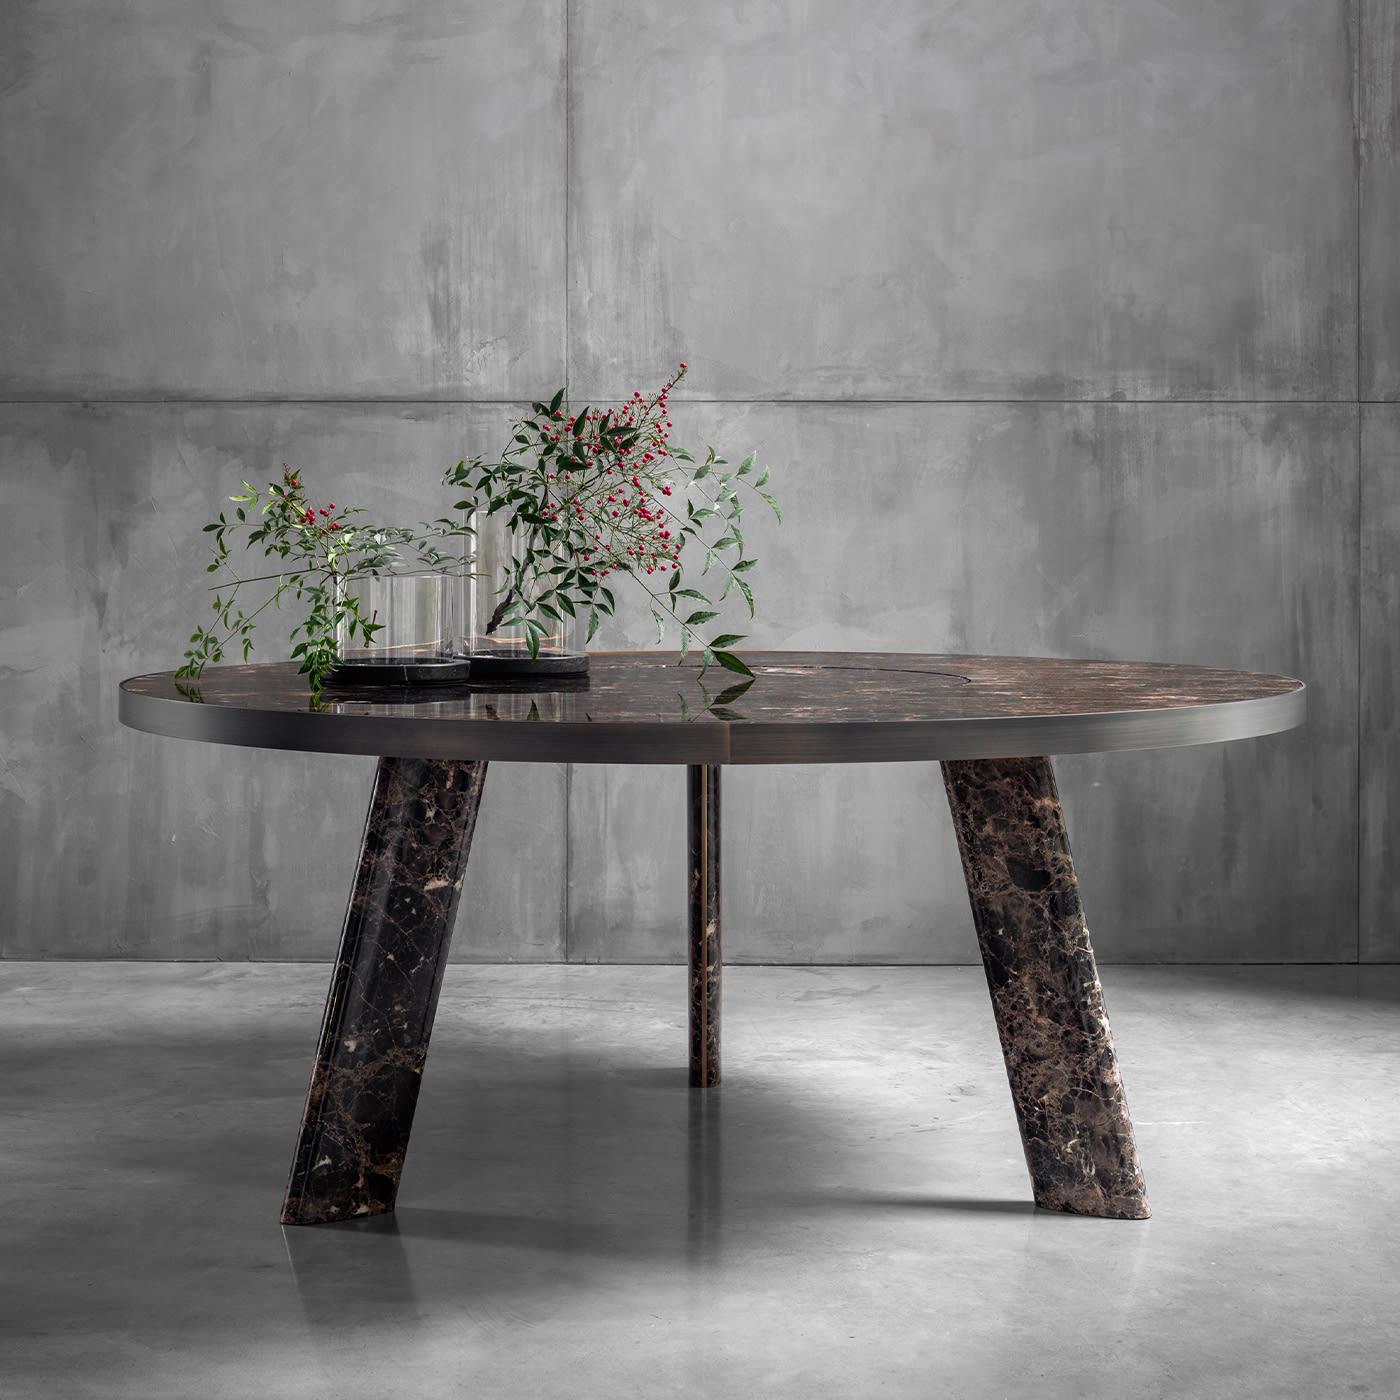 Designed as a balanced synthesis between clean modern lines and the instinctive luxury immediately conveyed by prized Dark Emperador marble, this round dining table will seduce with its intricate, unrepeatable tracery in intense warm tones. The bold